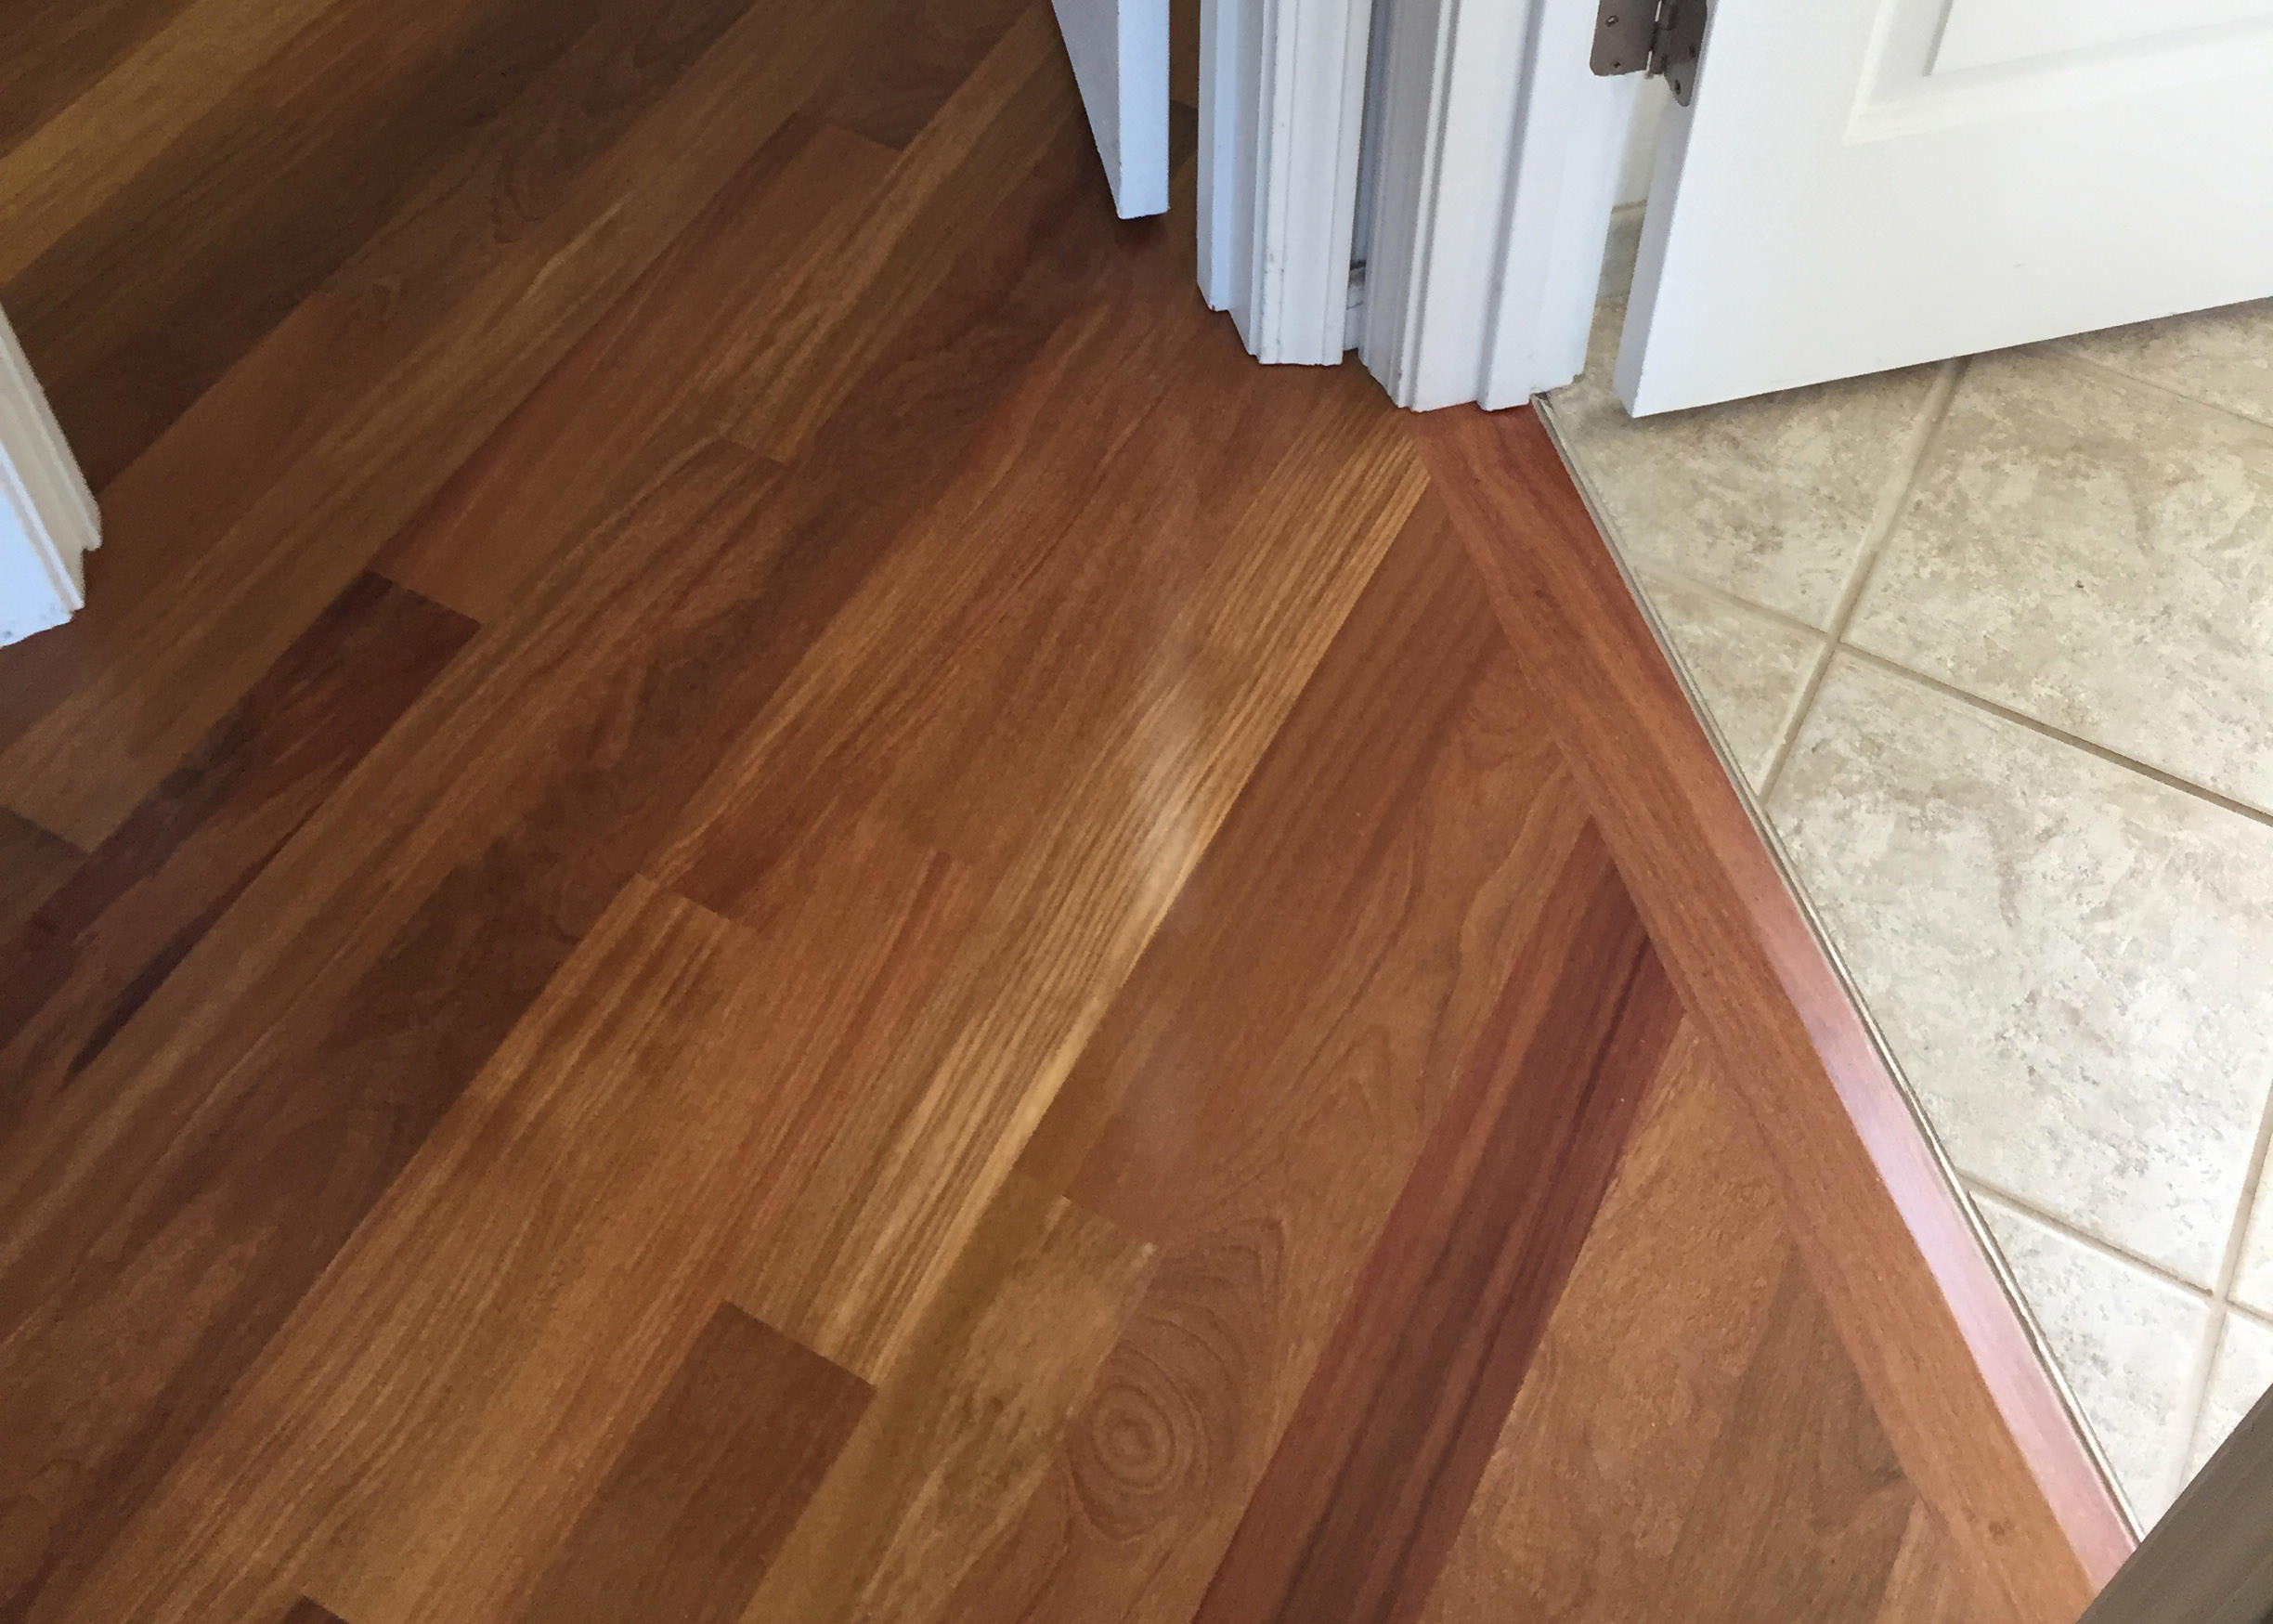 Transition Boards for Hardwood Floors That Laminate On Cement